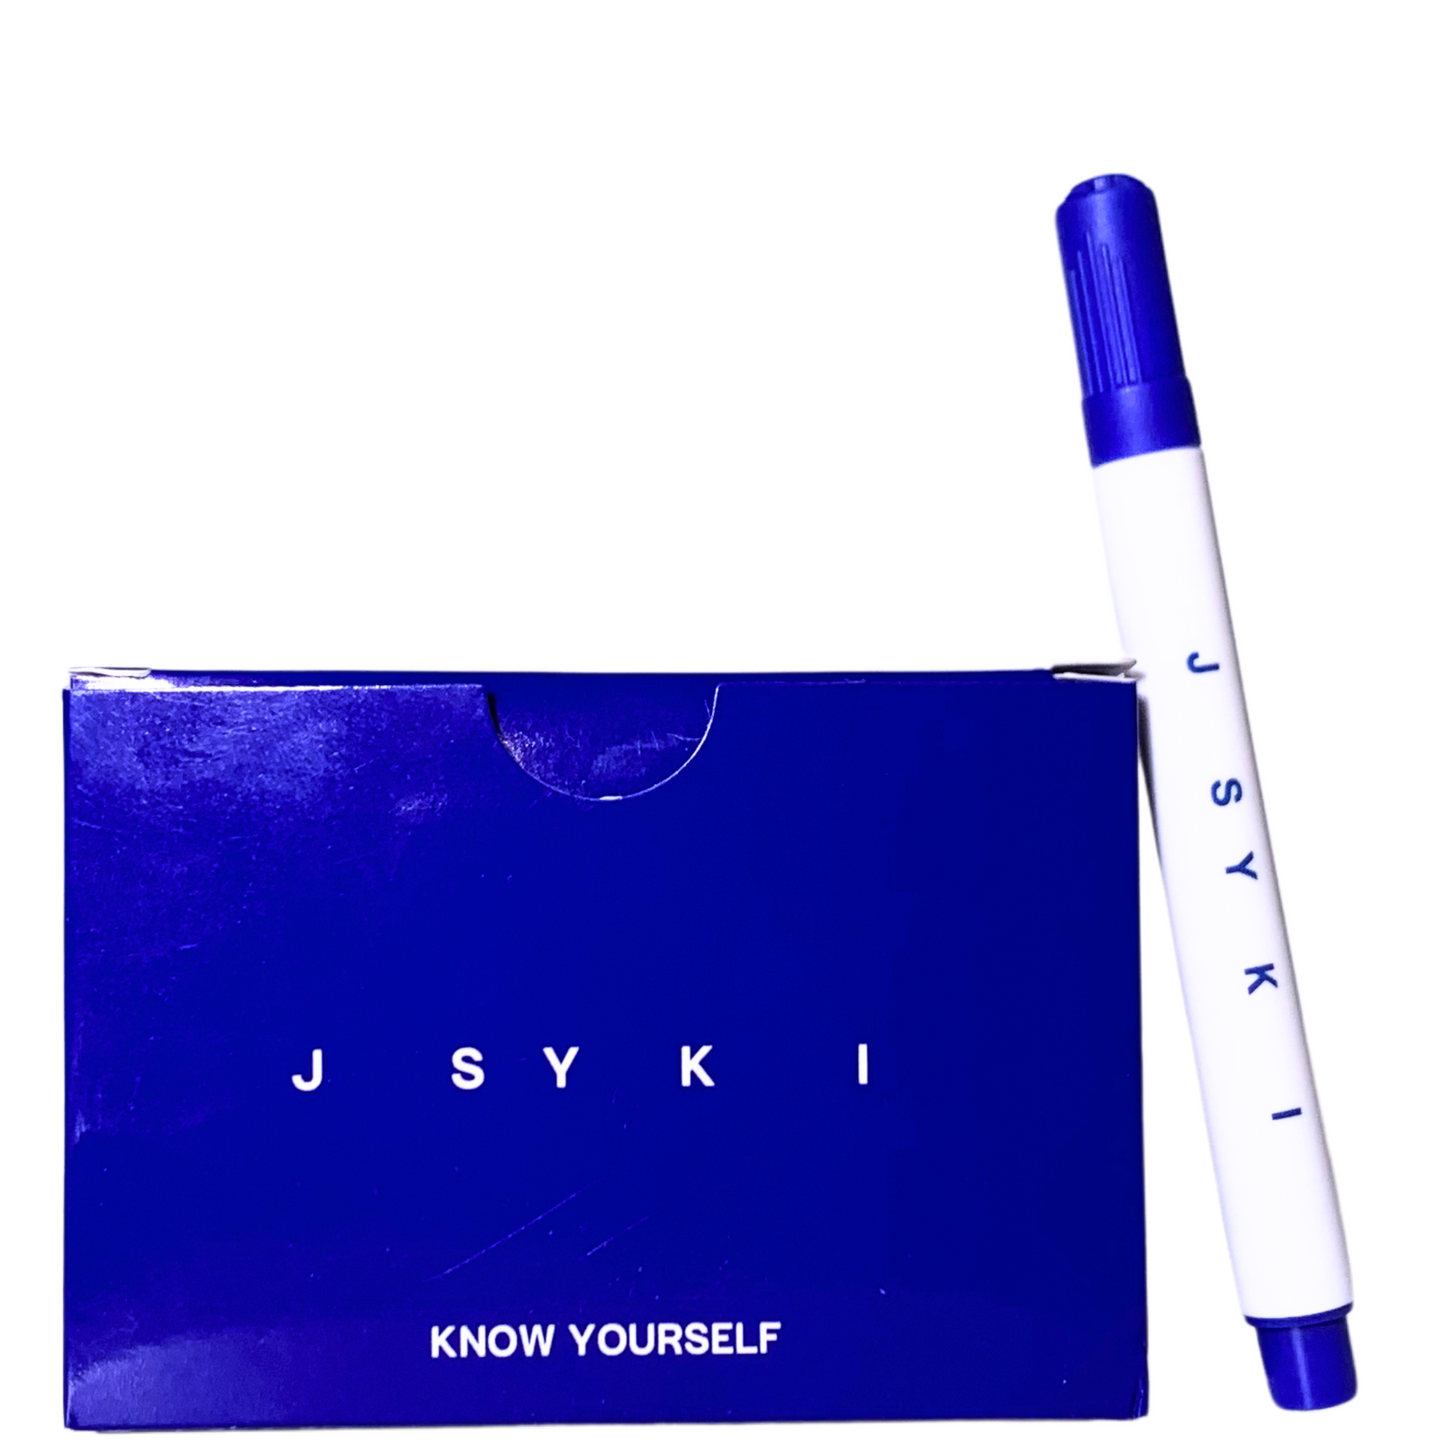 KNOW YOURSELF WITH PEN